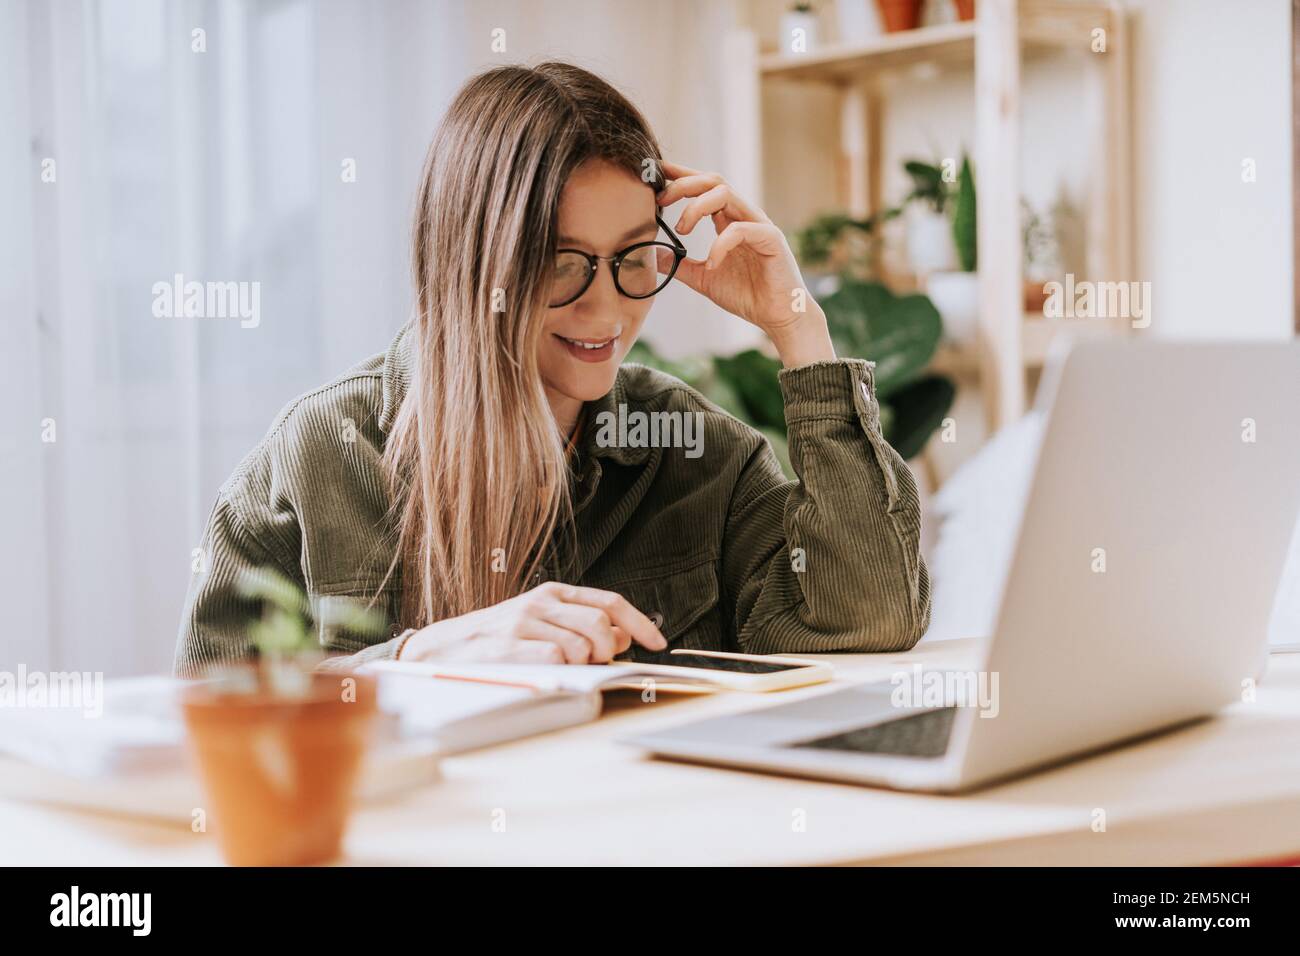 Woman writes in notebook with laptop Stock Photo